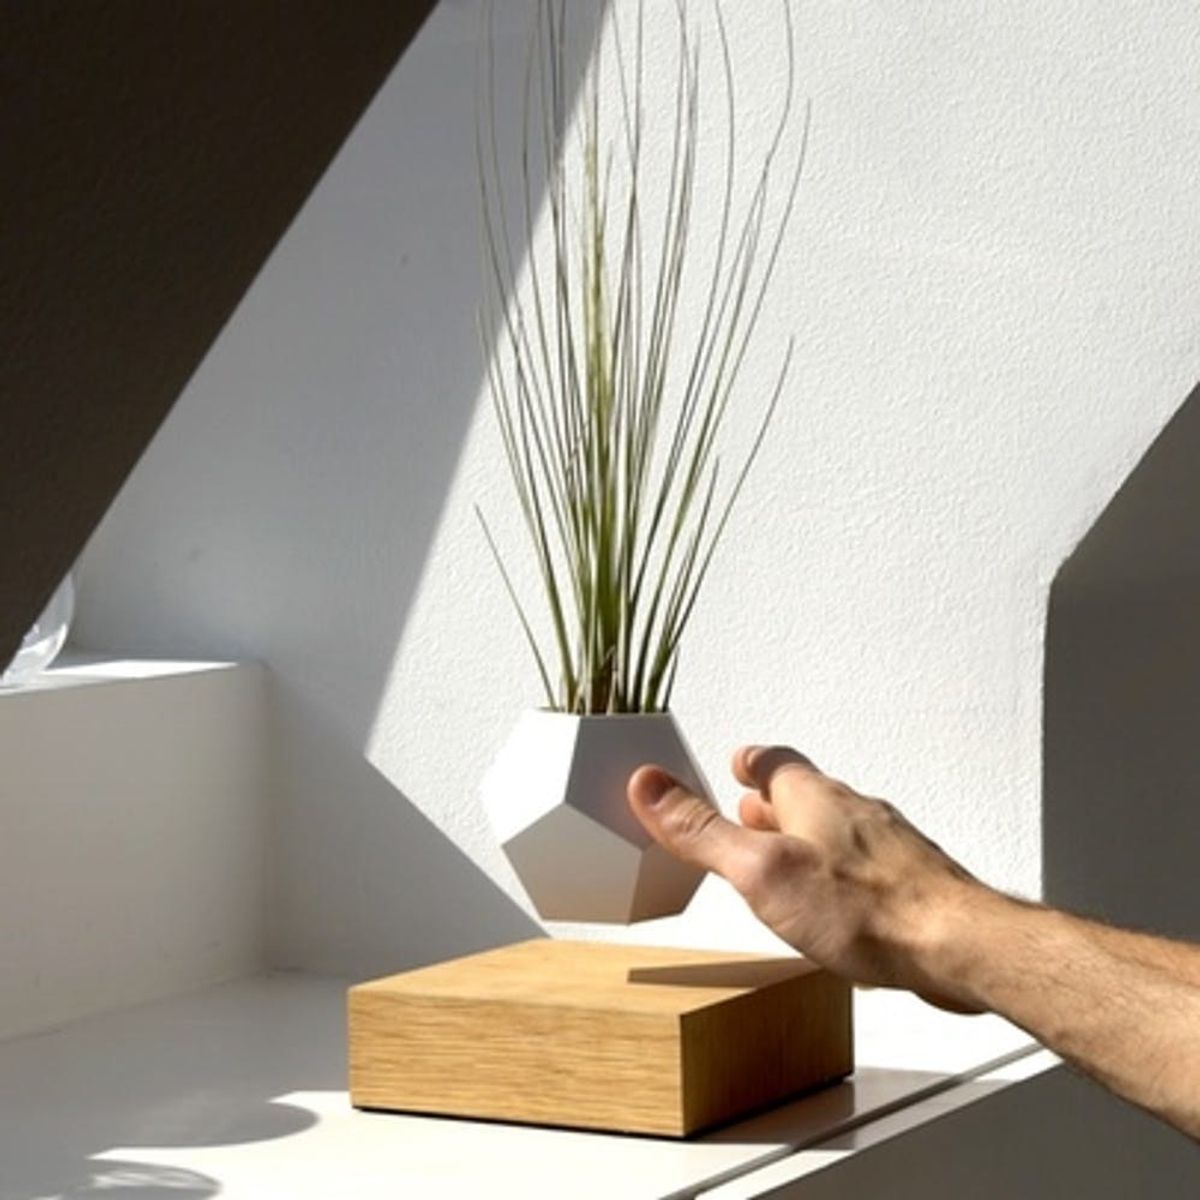 These Magnetized Planters Levitate in the Air